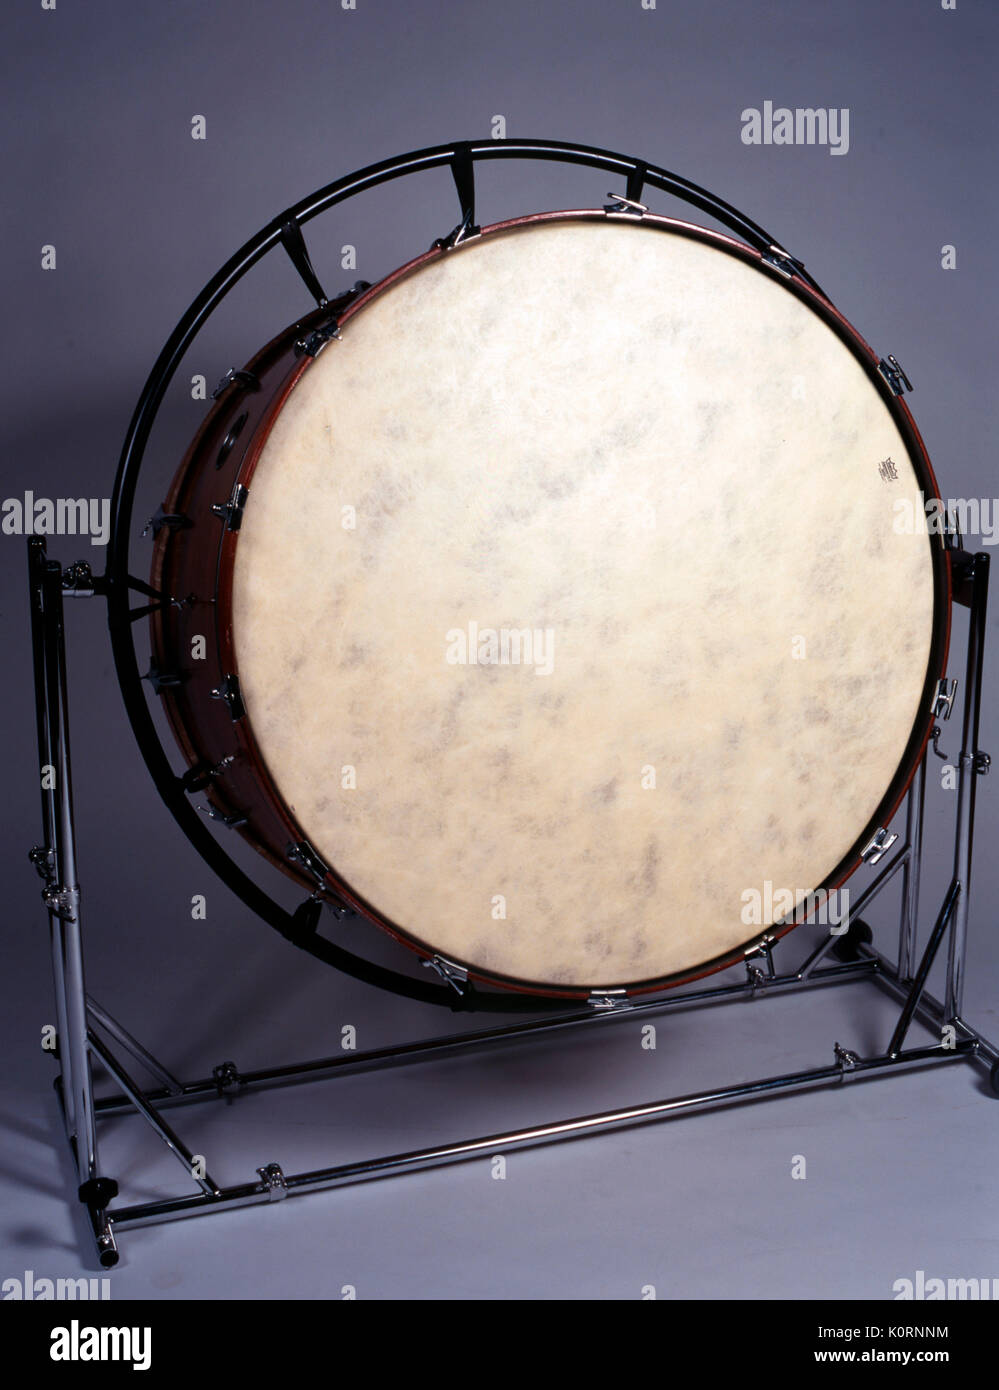 Orchestral Bass Drum on swivel stand Stock Photo - Alamy